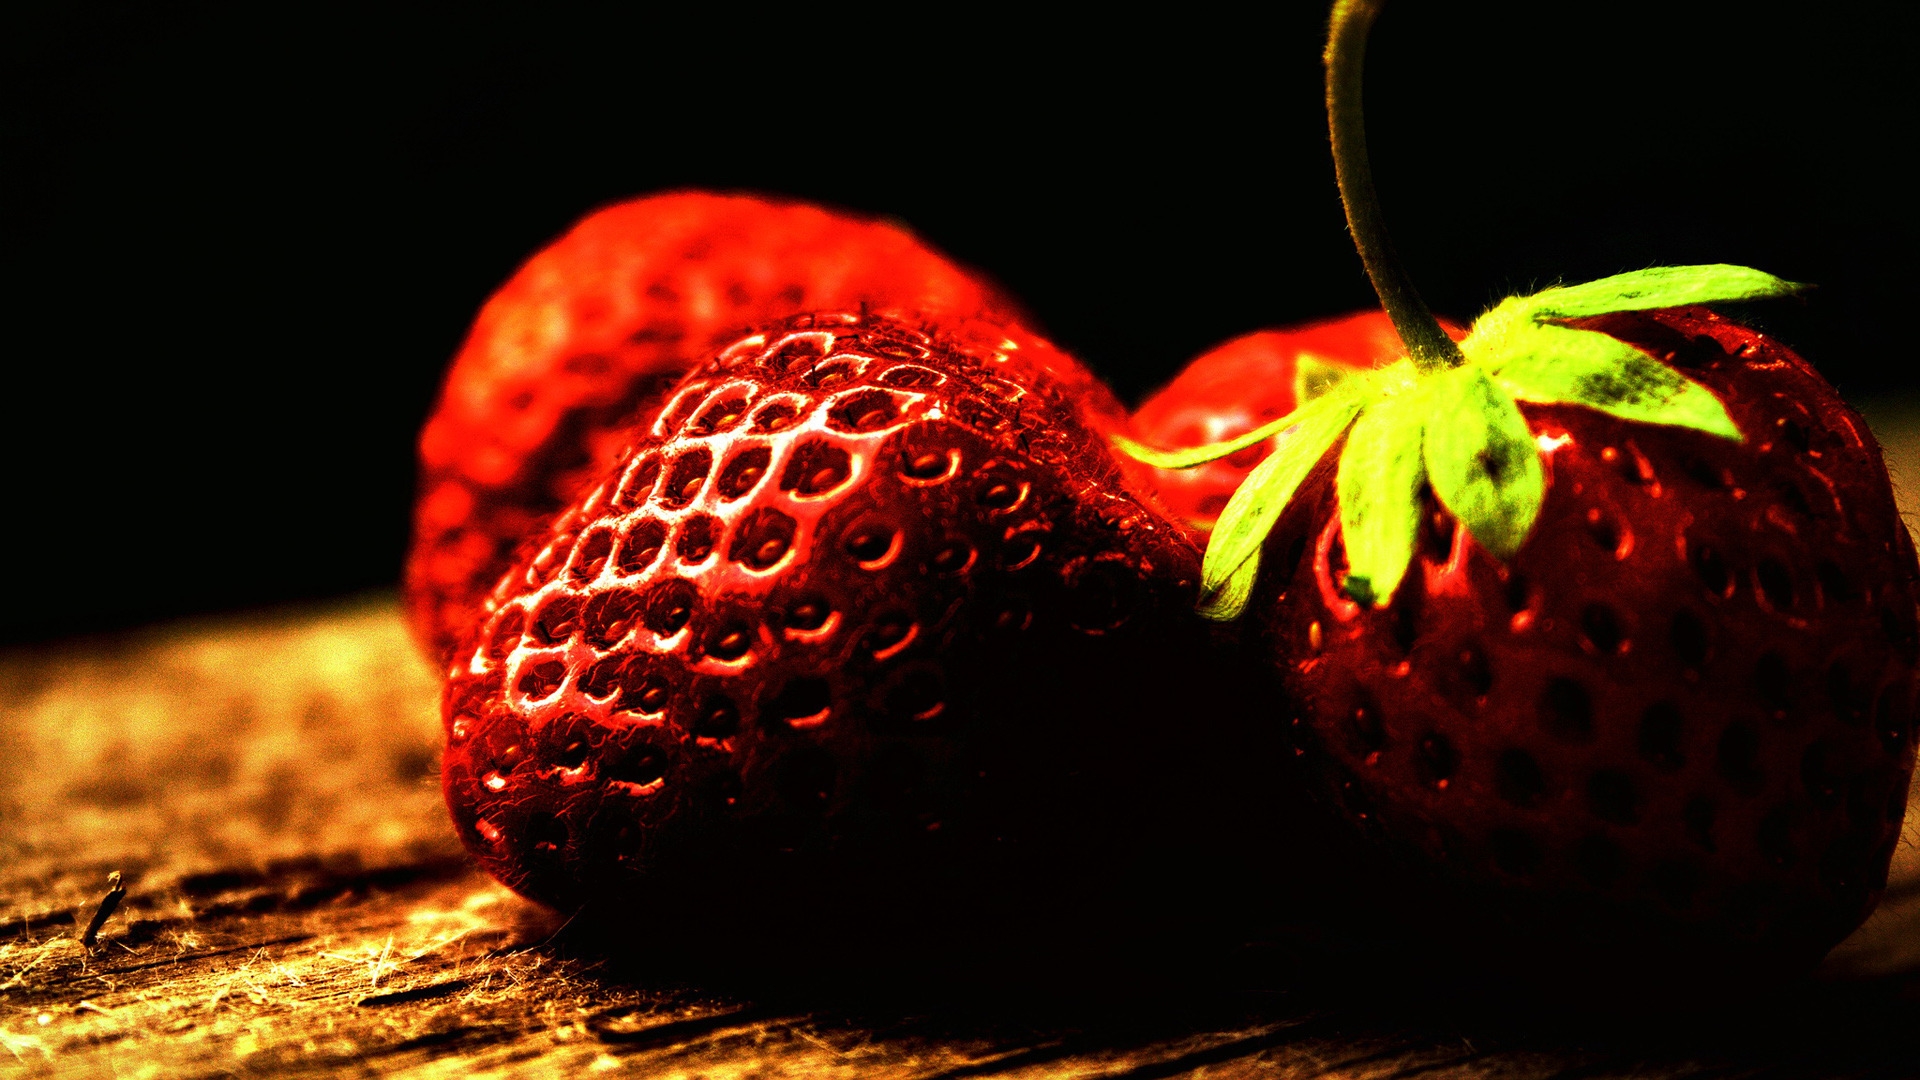 Strawberry for 1920 x 1080 HDTV 1080p resolution